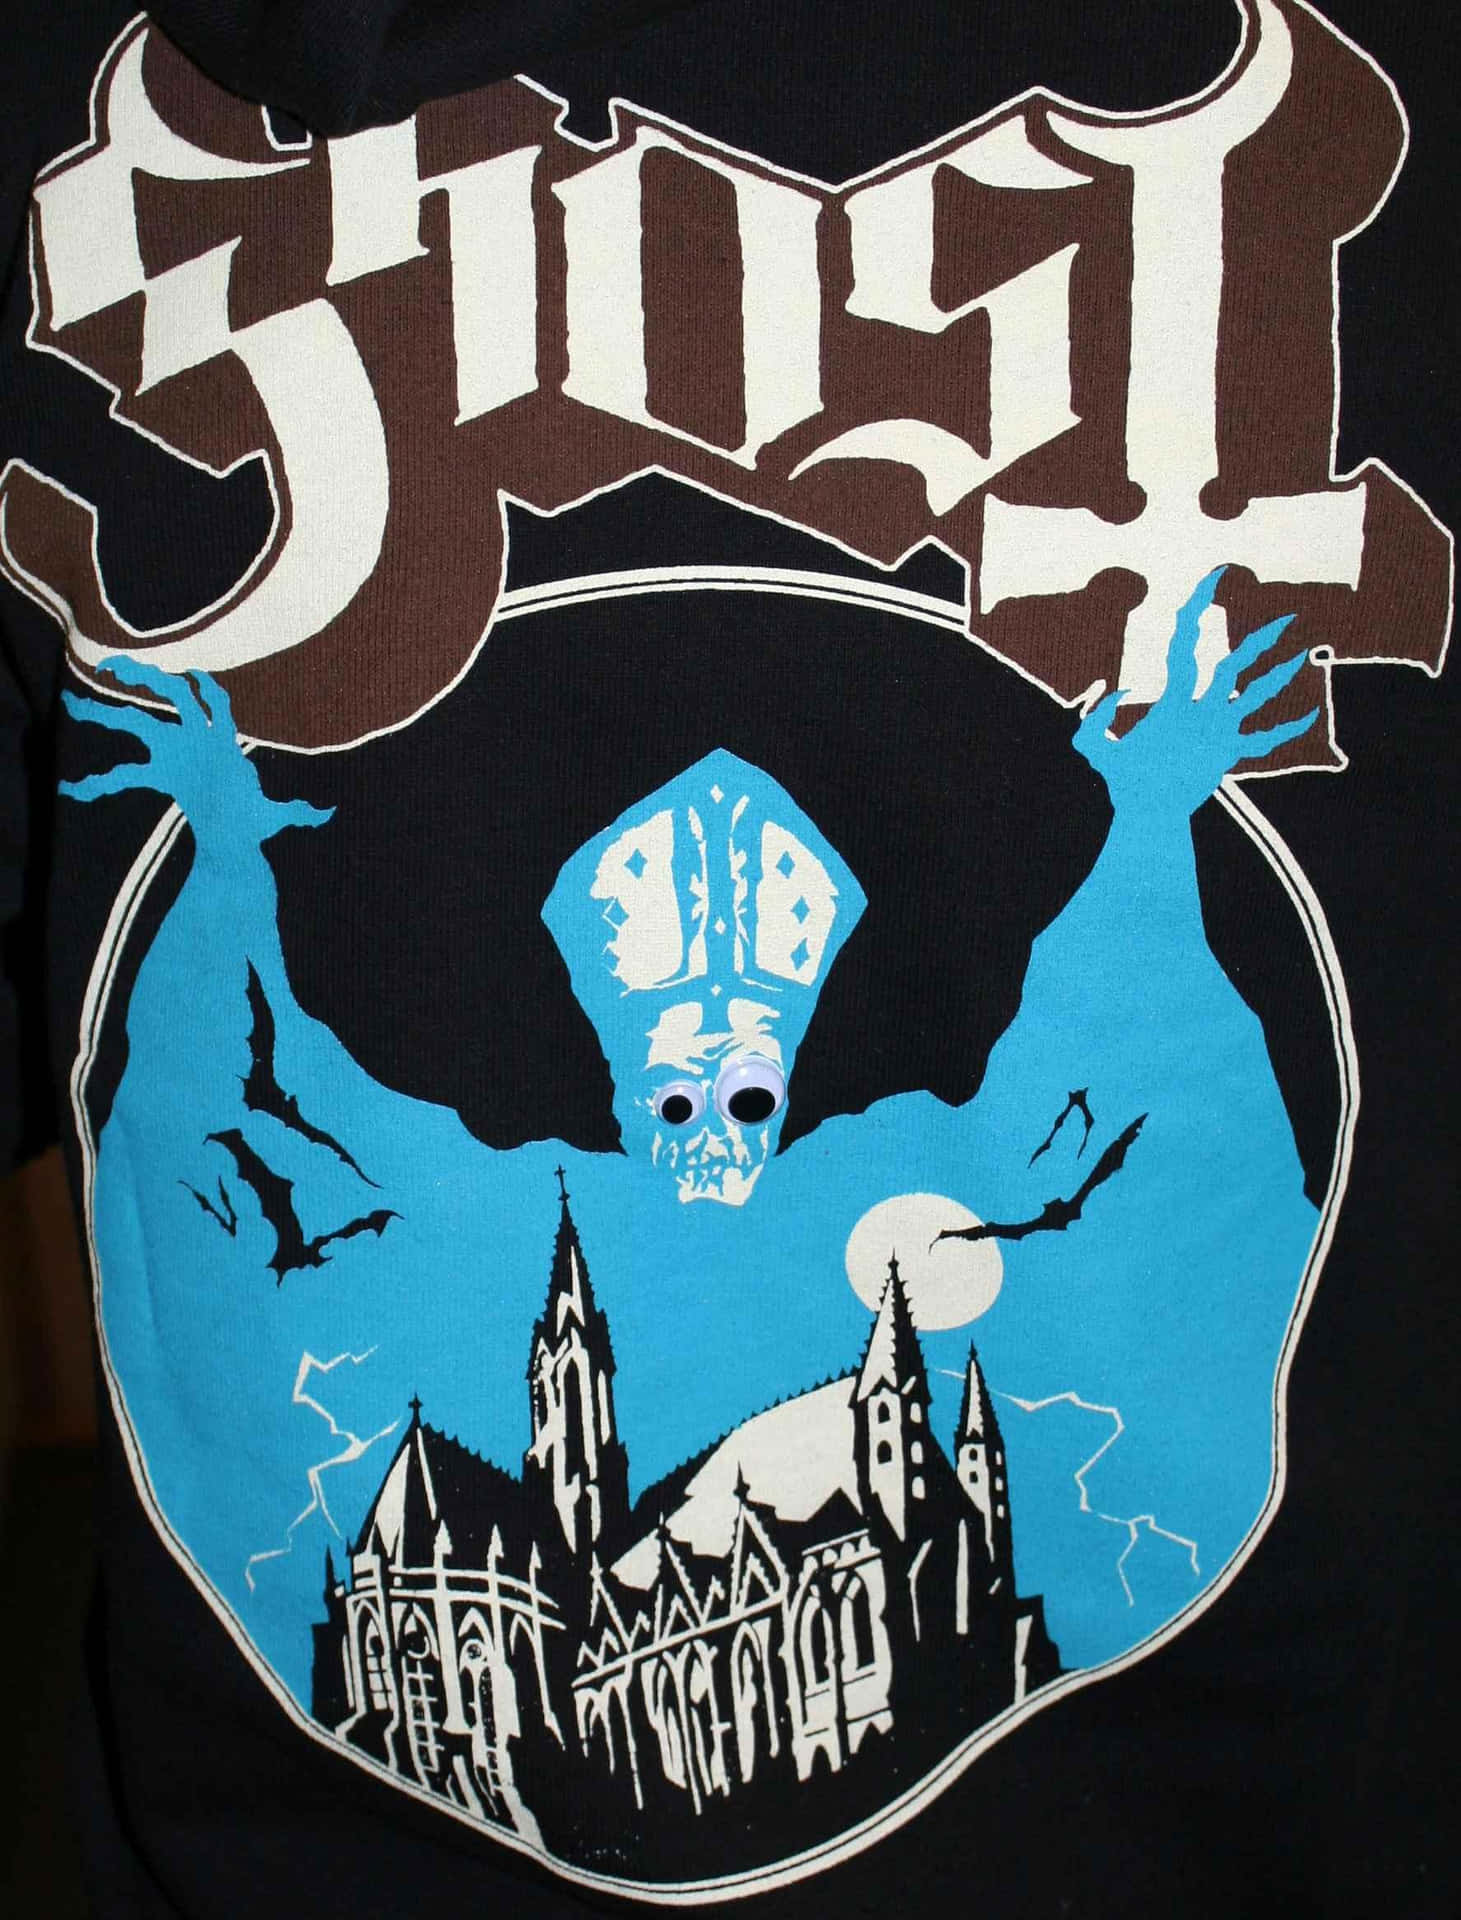 Ghost Band Opus Eponymous Wallpaper